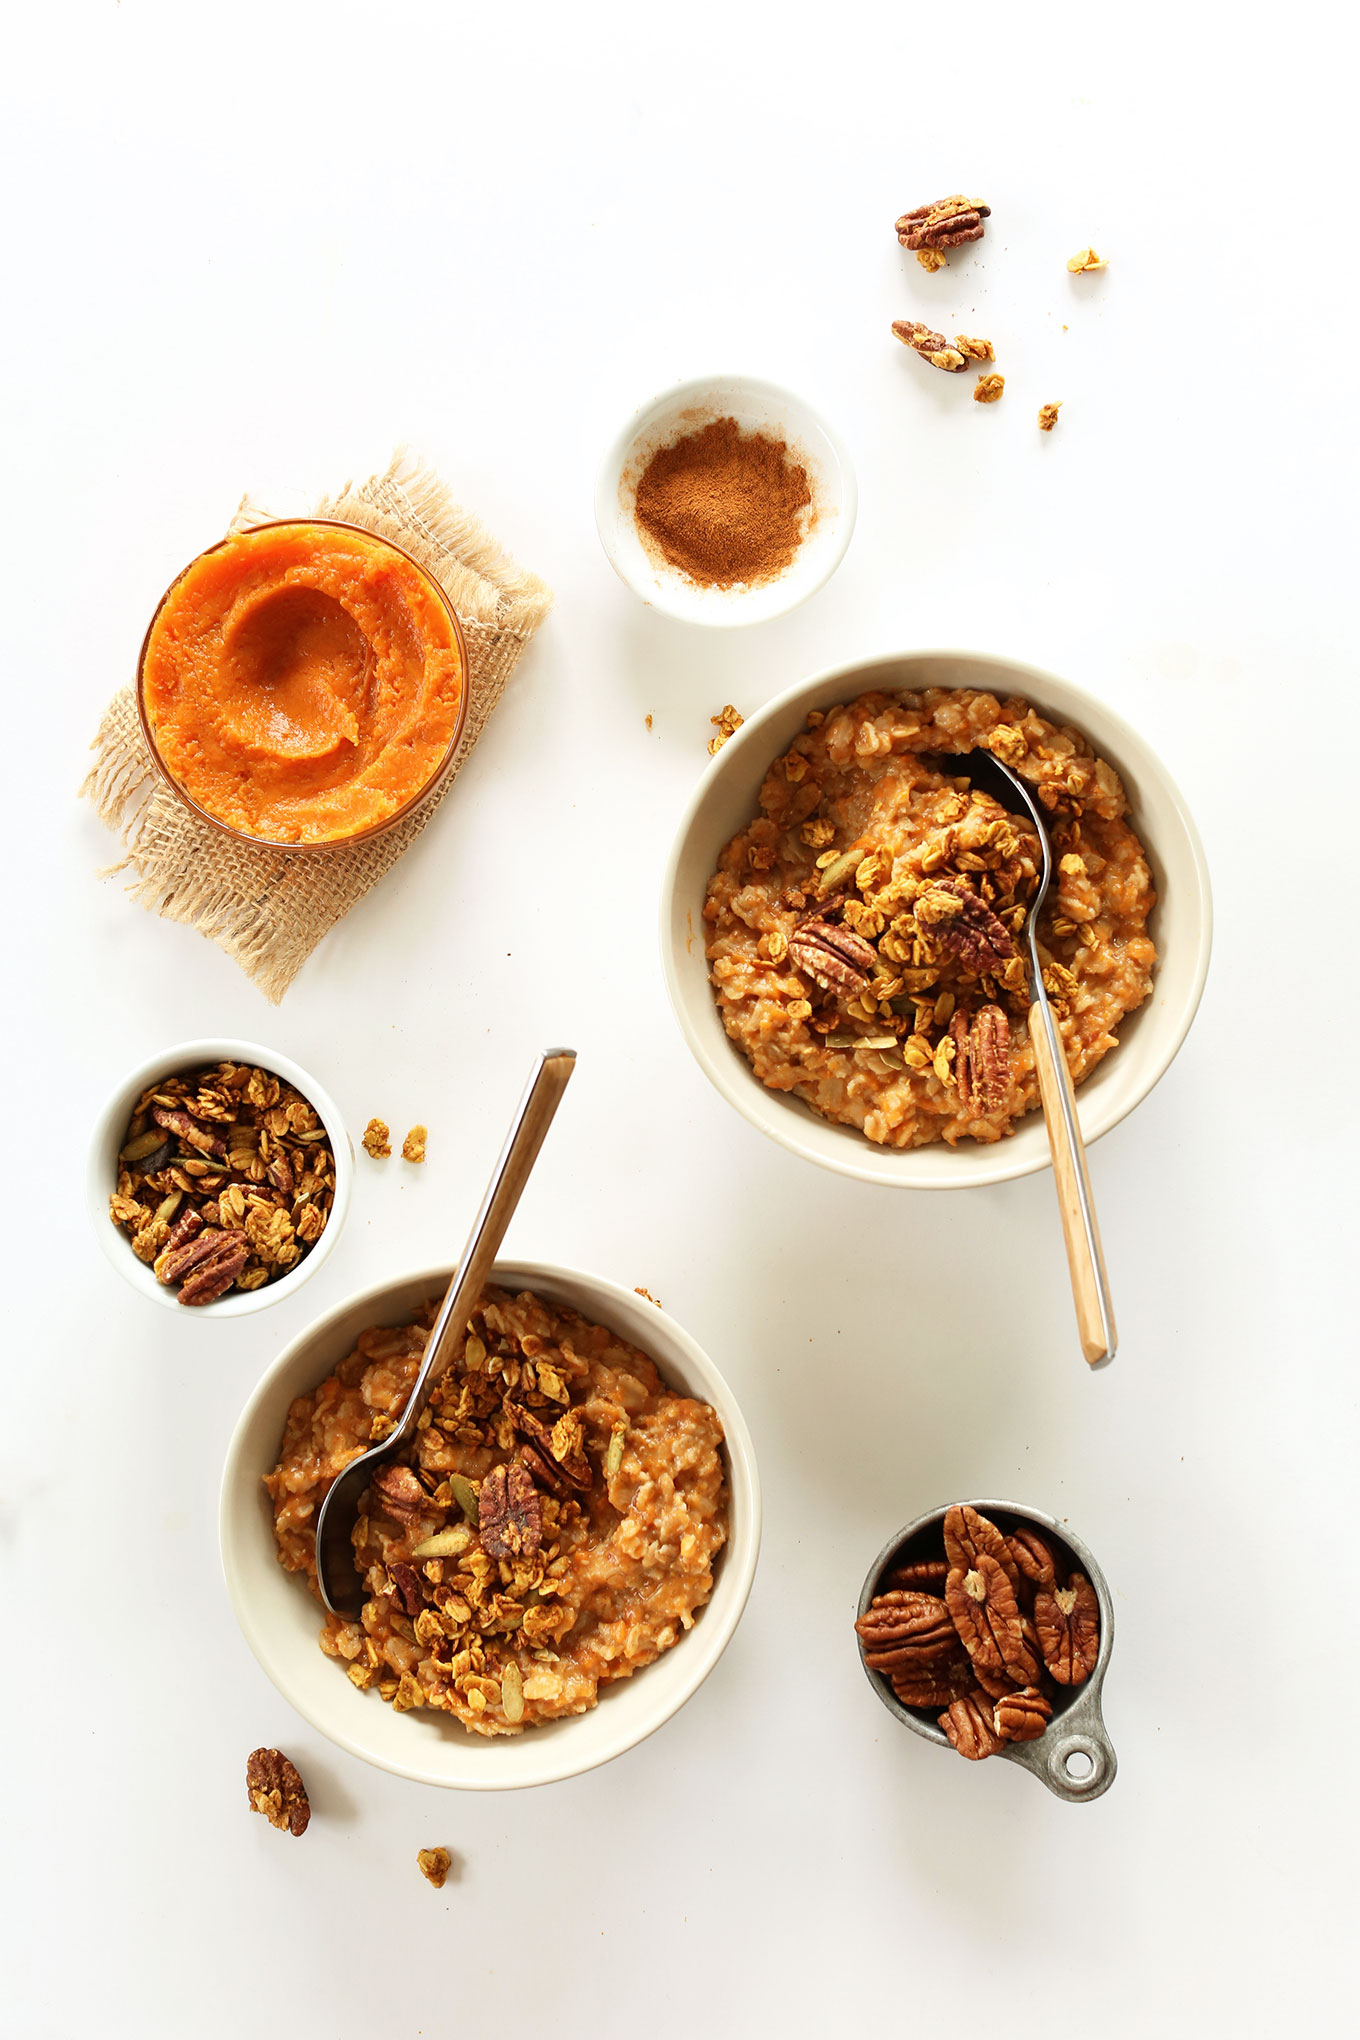 Bowls filled with our recipe for gluten-free vegan Sweet Potato Pie Oats